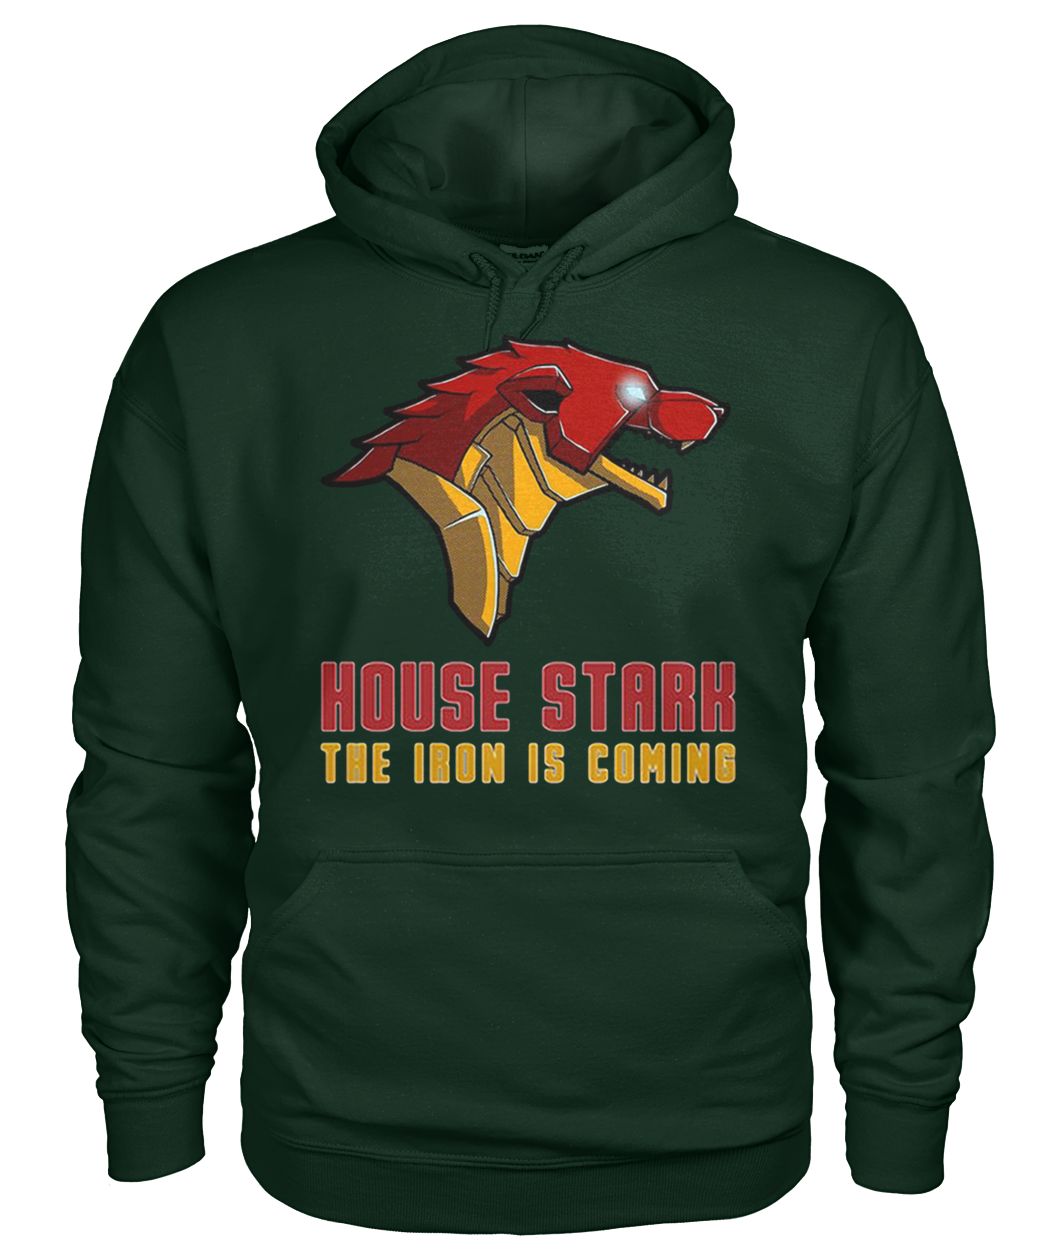 Tony stark house stark the iron is coming marvel avengers and game of thrones gildan hoodie